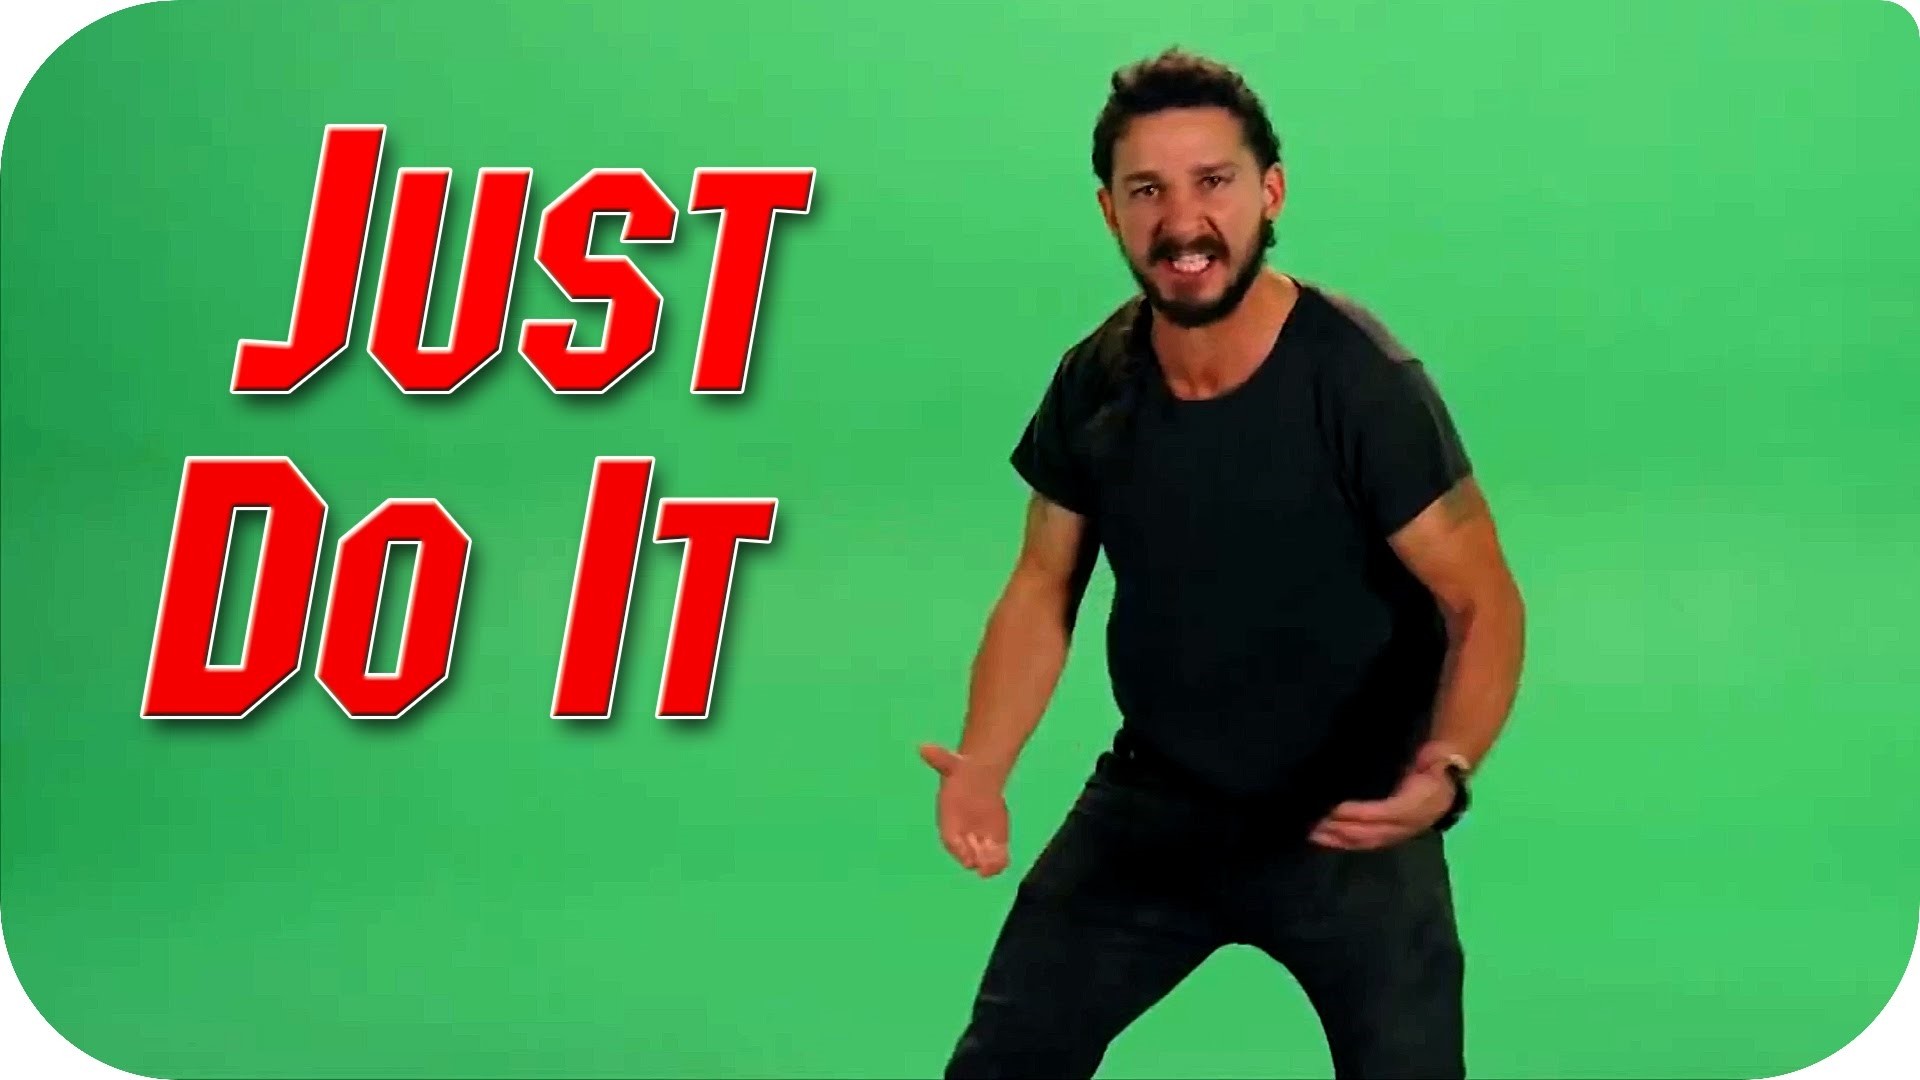 Shia Labeouf Just Do It Wallpaper Images